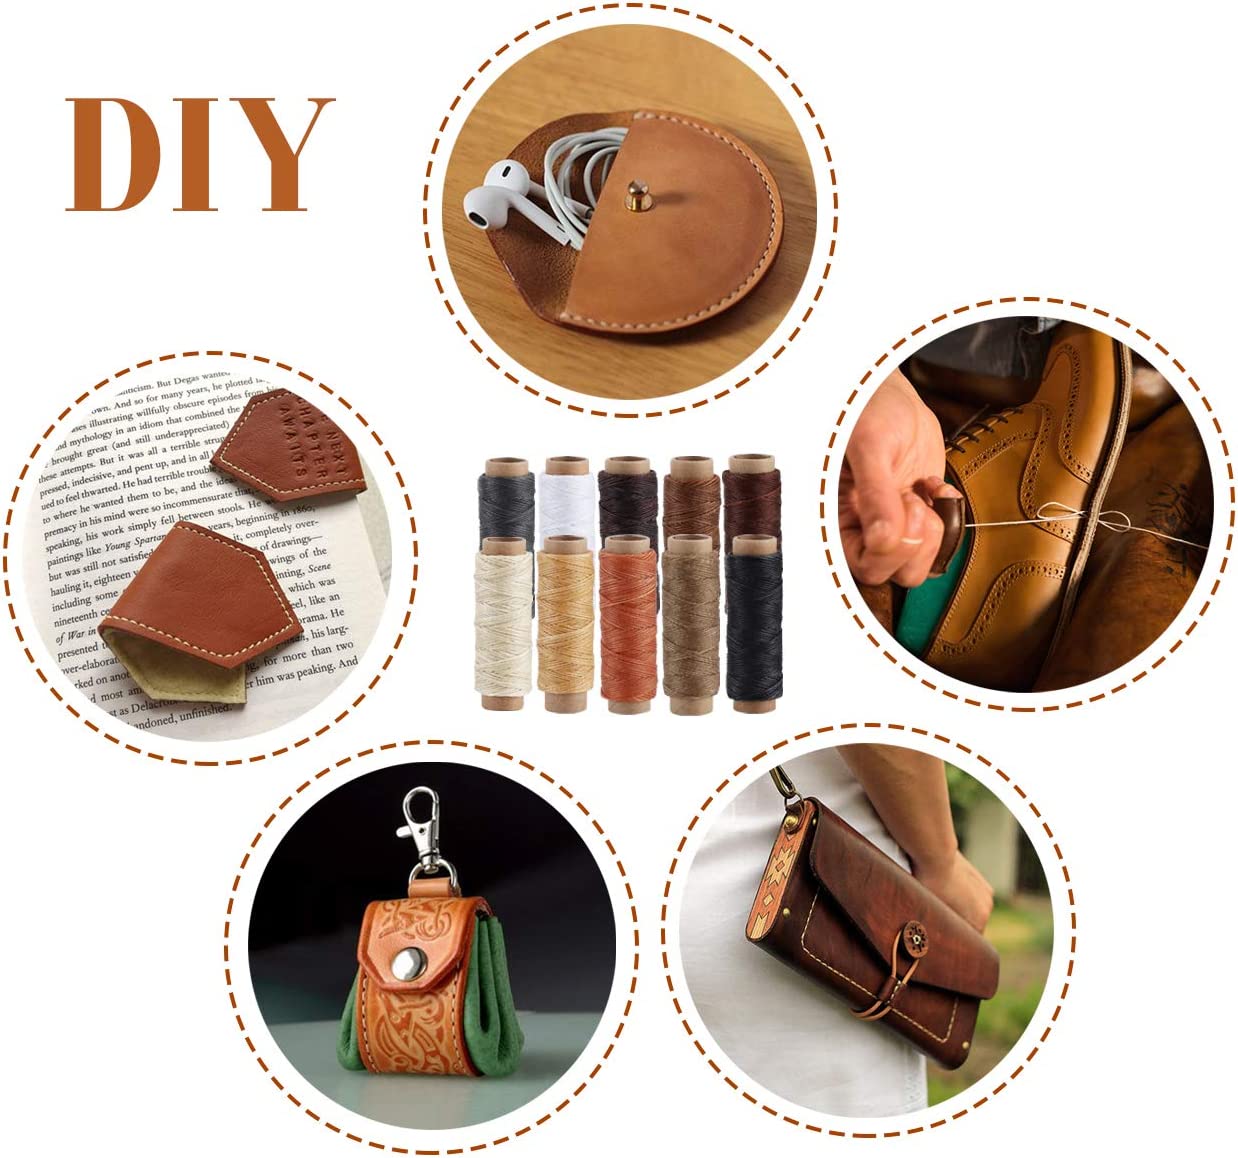 Jupean 424 Pieces Leather Working Tools and Supplies, Leather Craft Kits with Instructions, Leather Sewing Kit, Leather Tool Holder, Wooden Storage